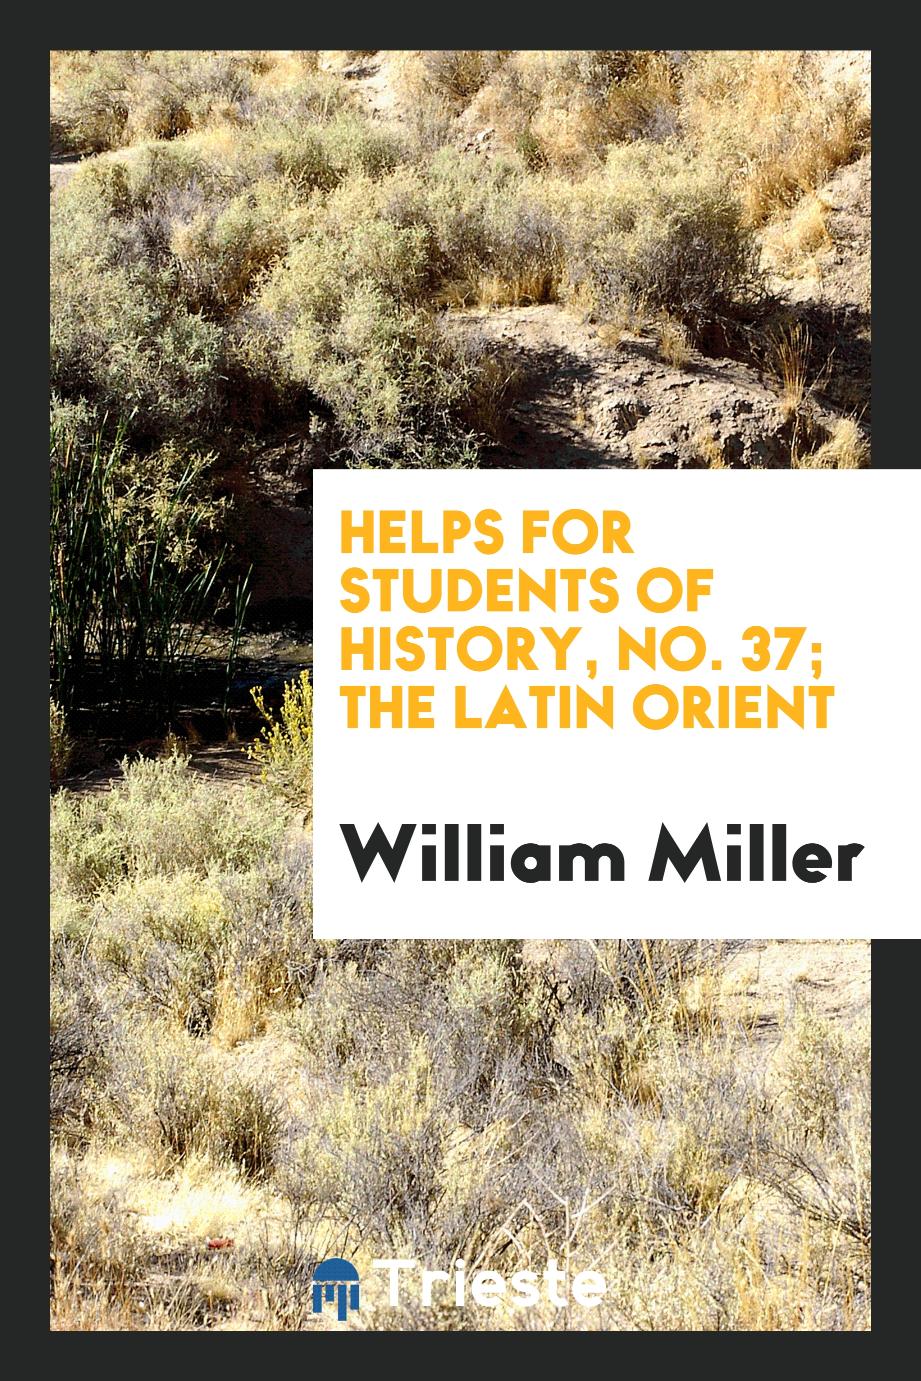 Helps for Students of History, No. 37; The Latin Orient